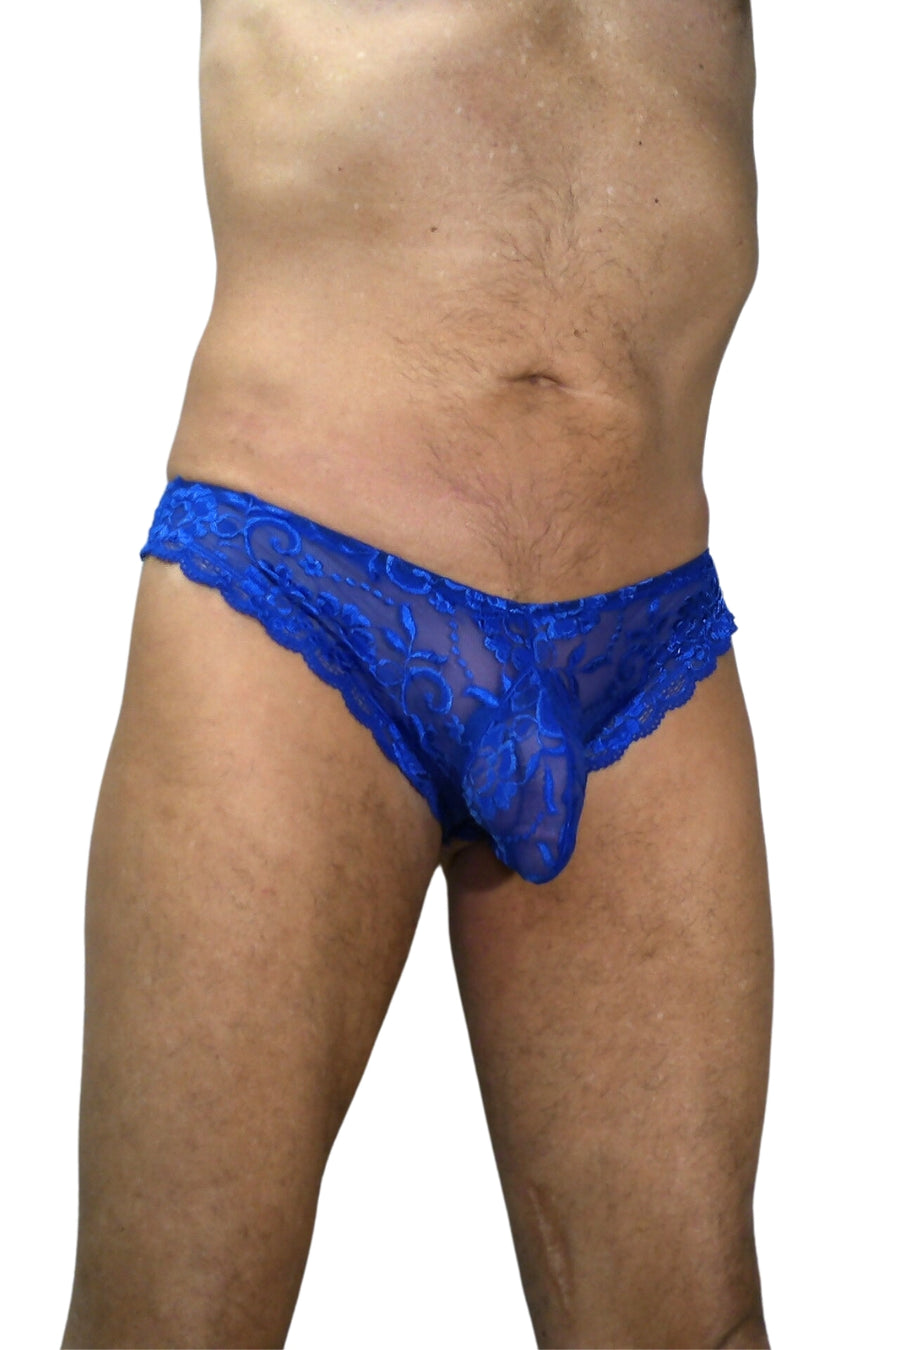 Dark Blue Lace Brief with a Brazillain cut back and a generous pouch designed for your genitals. Low rise design and see through.